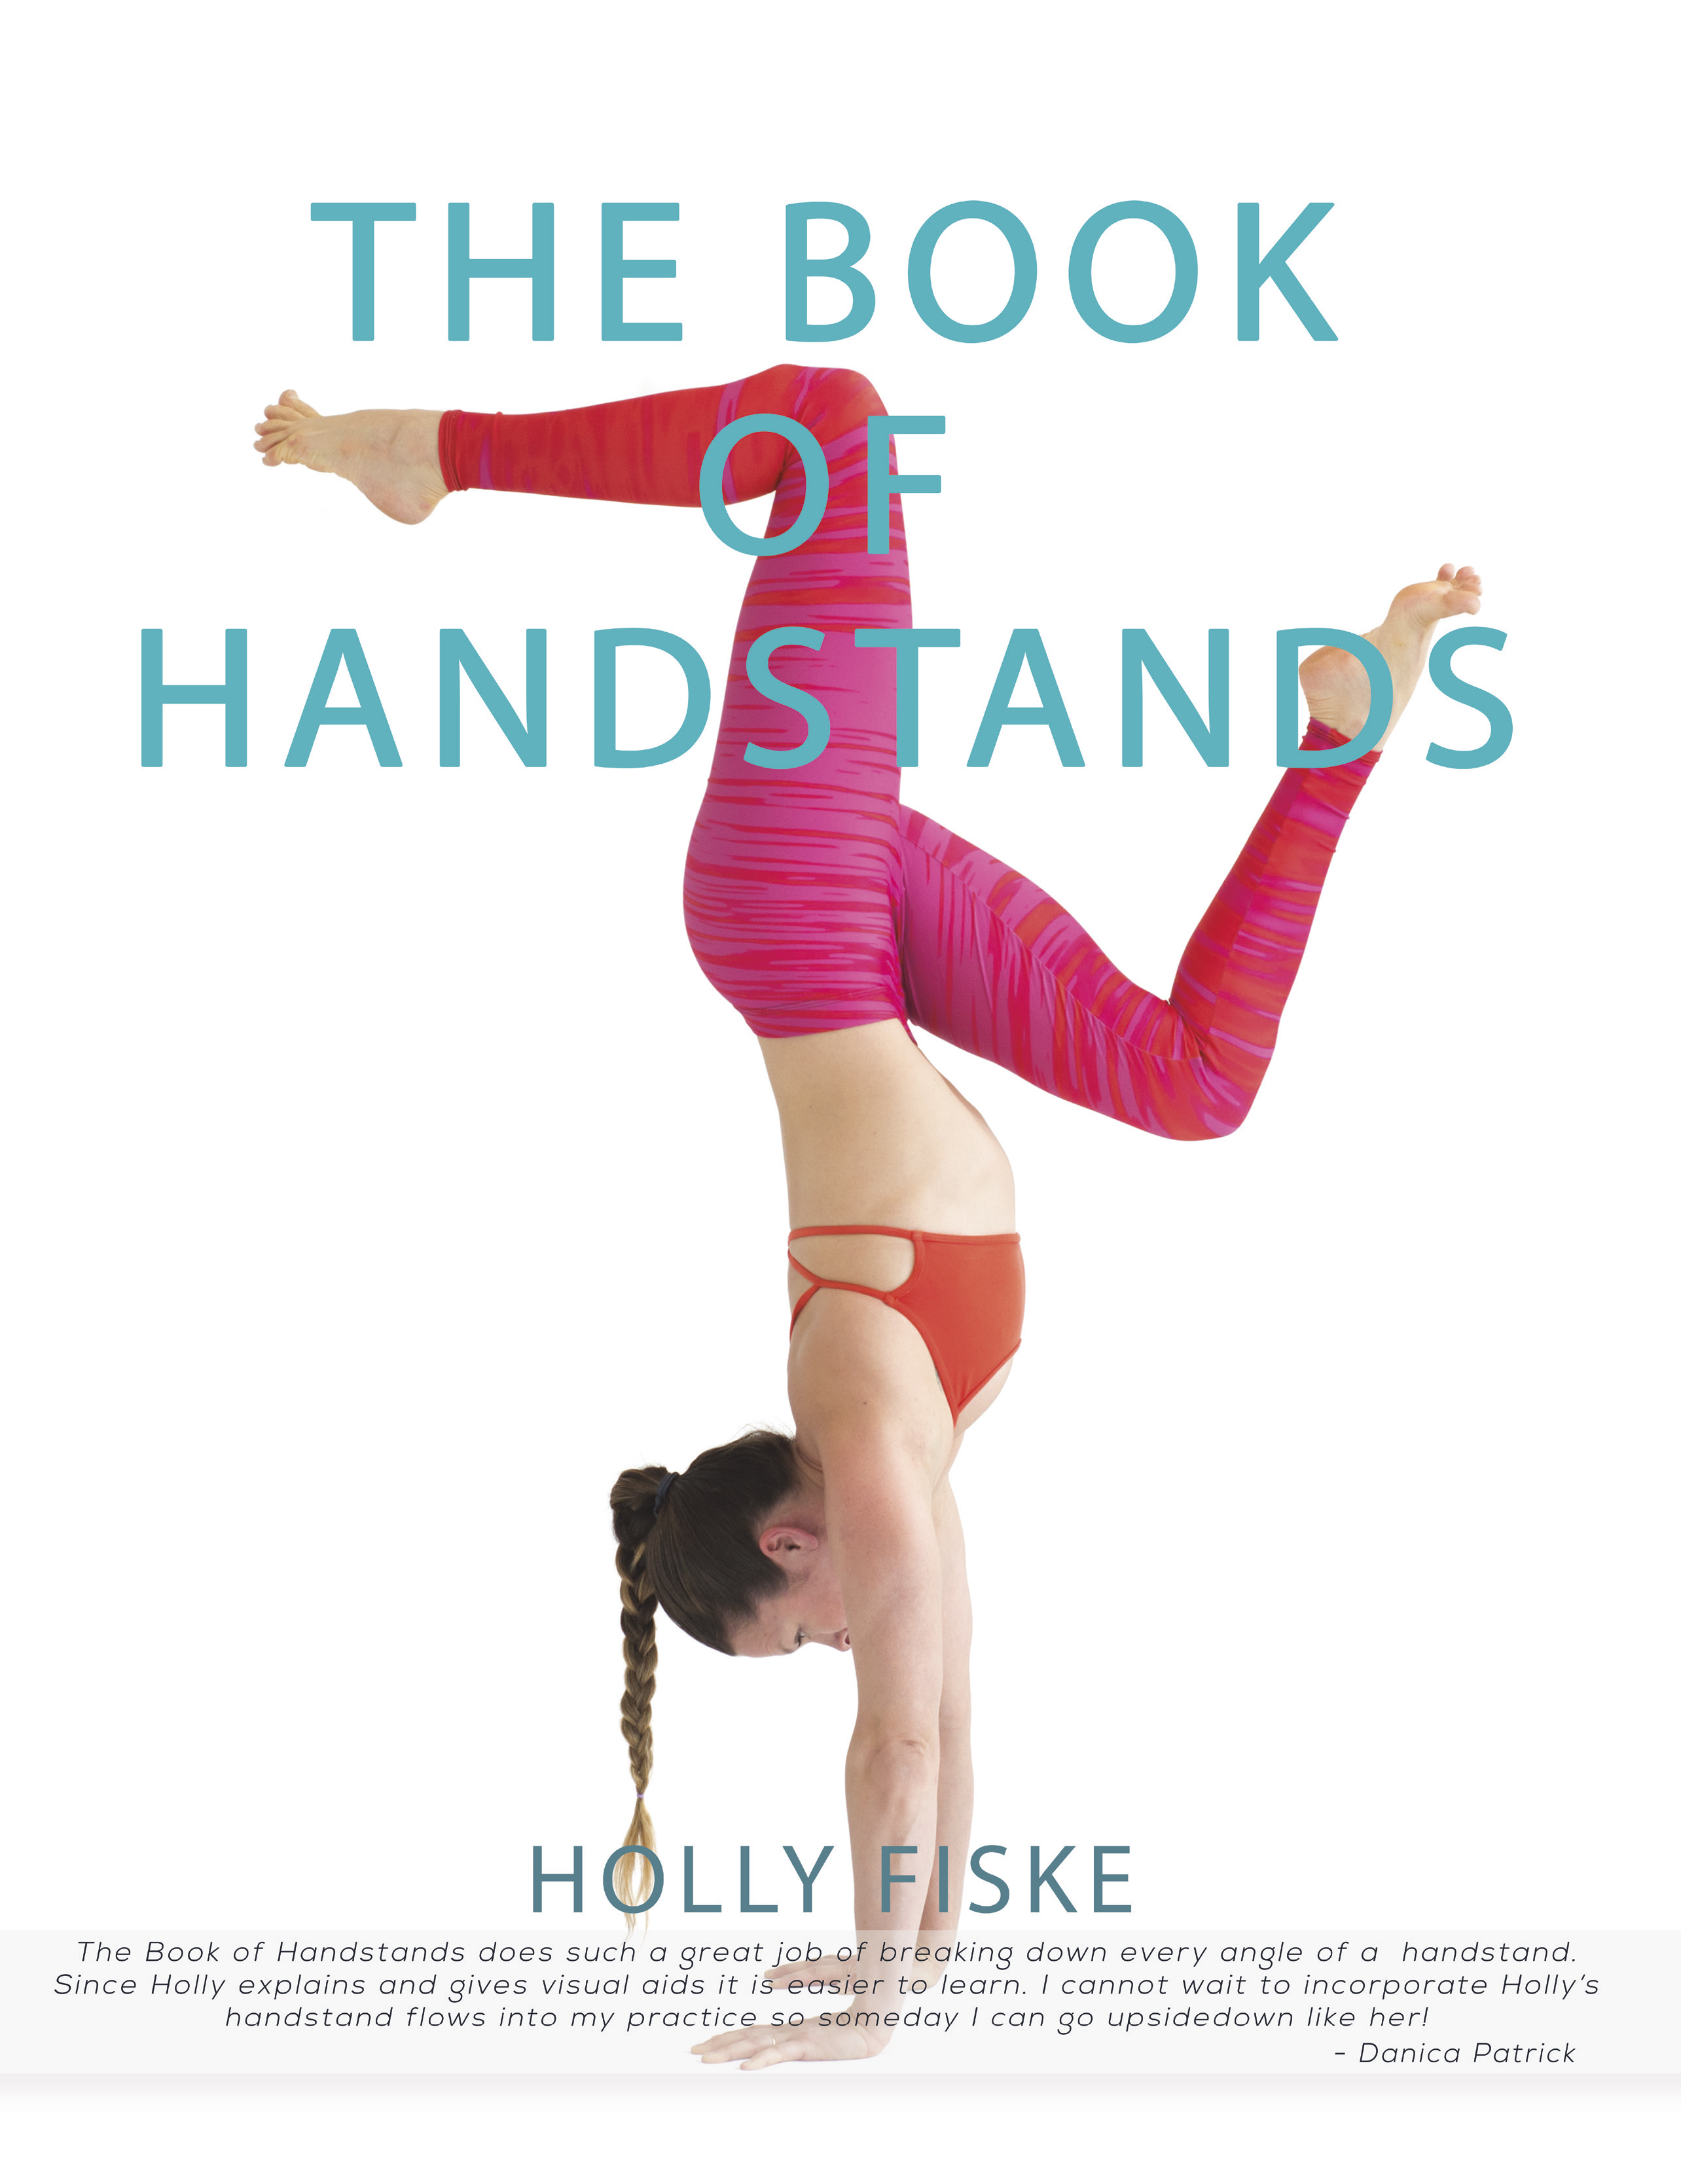 The Book of Handstands by Holly Fiske small business Gorham Printing